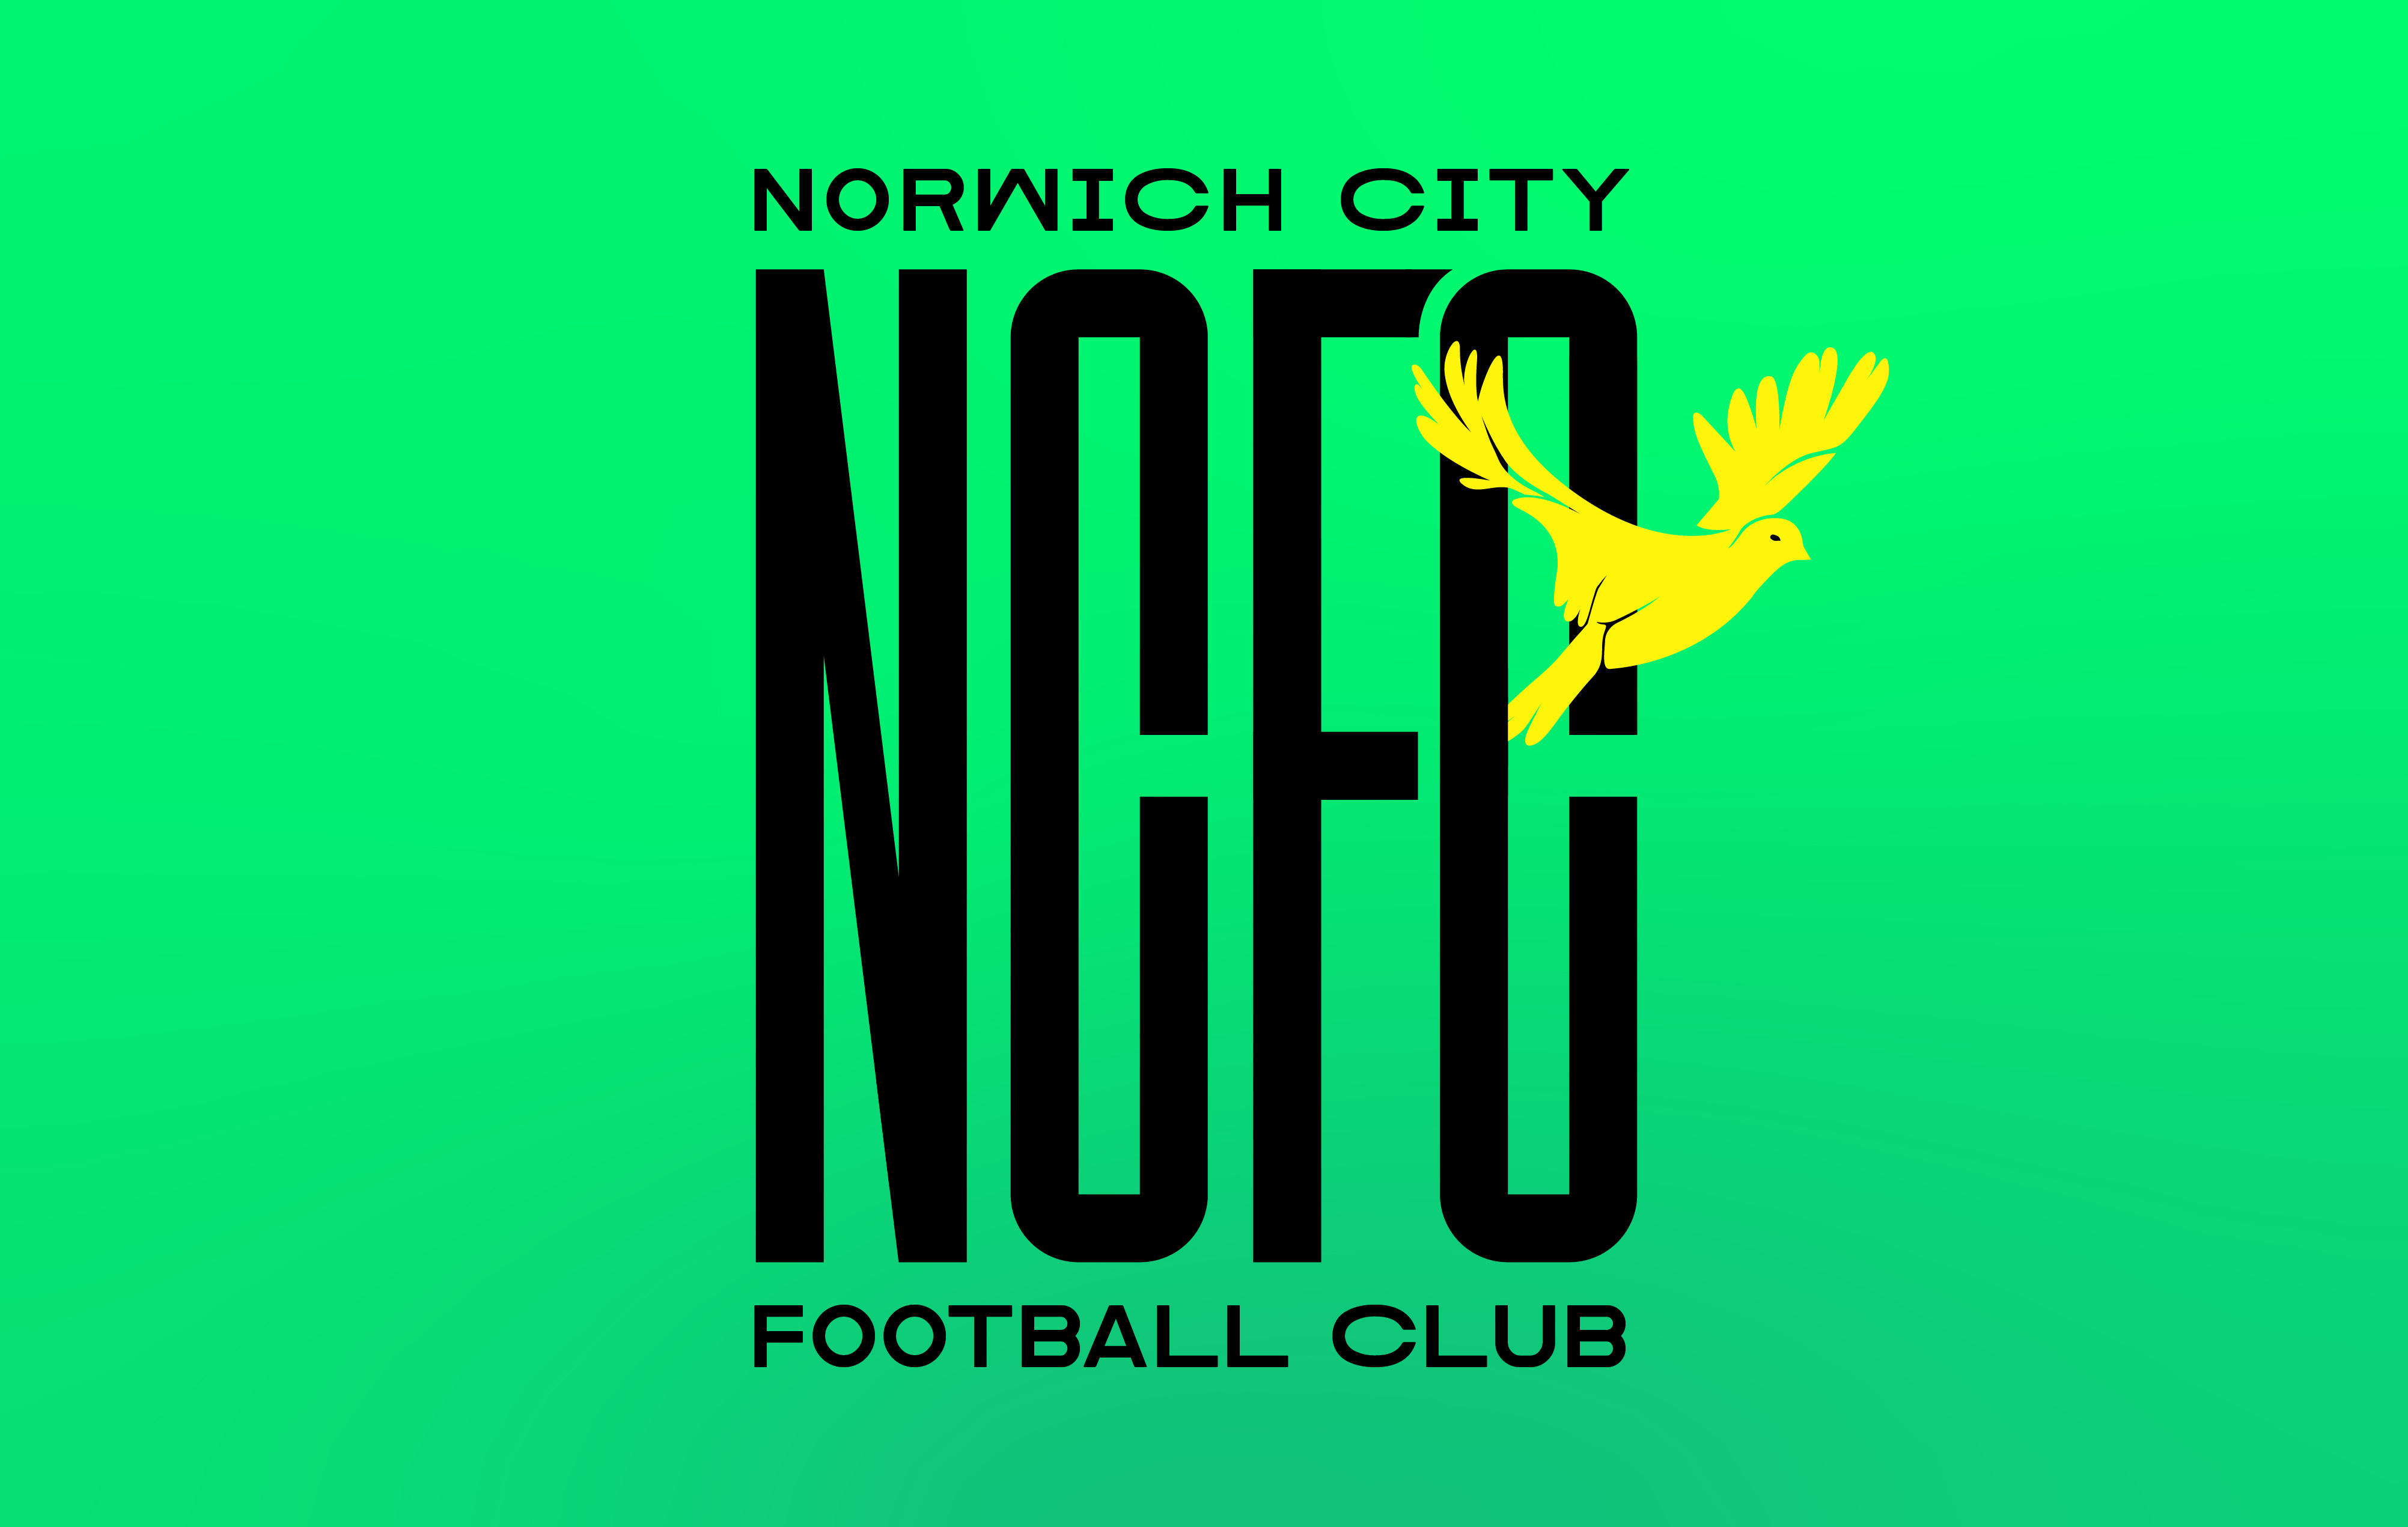 BA Graphic Design work by Reece Cornwall showing a new bright and daring identity for Norwich City Football Club.